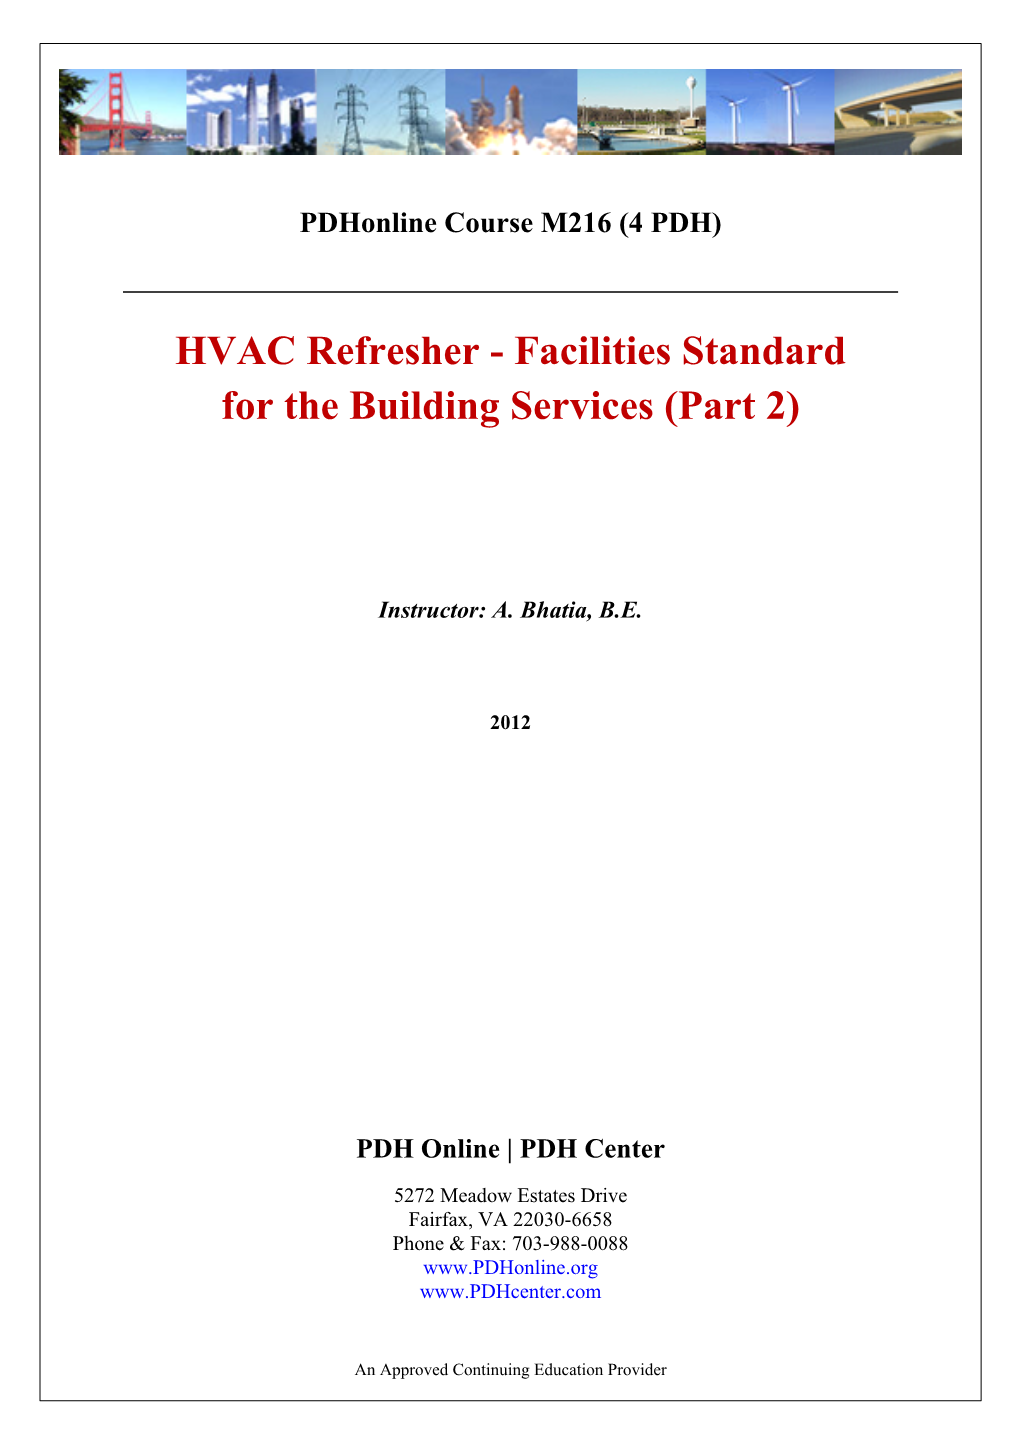 HVAC Refresher - Facilities Standard for the Building Services (Part 2)